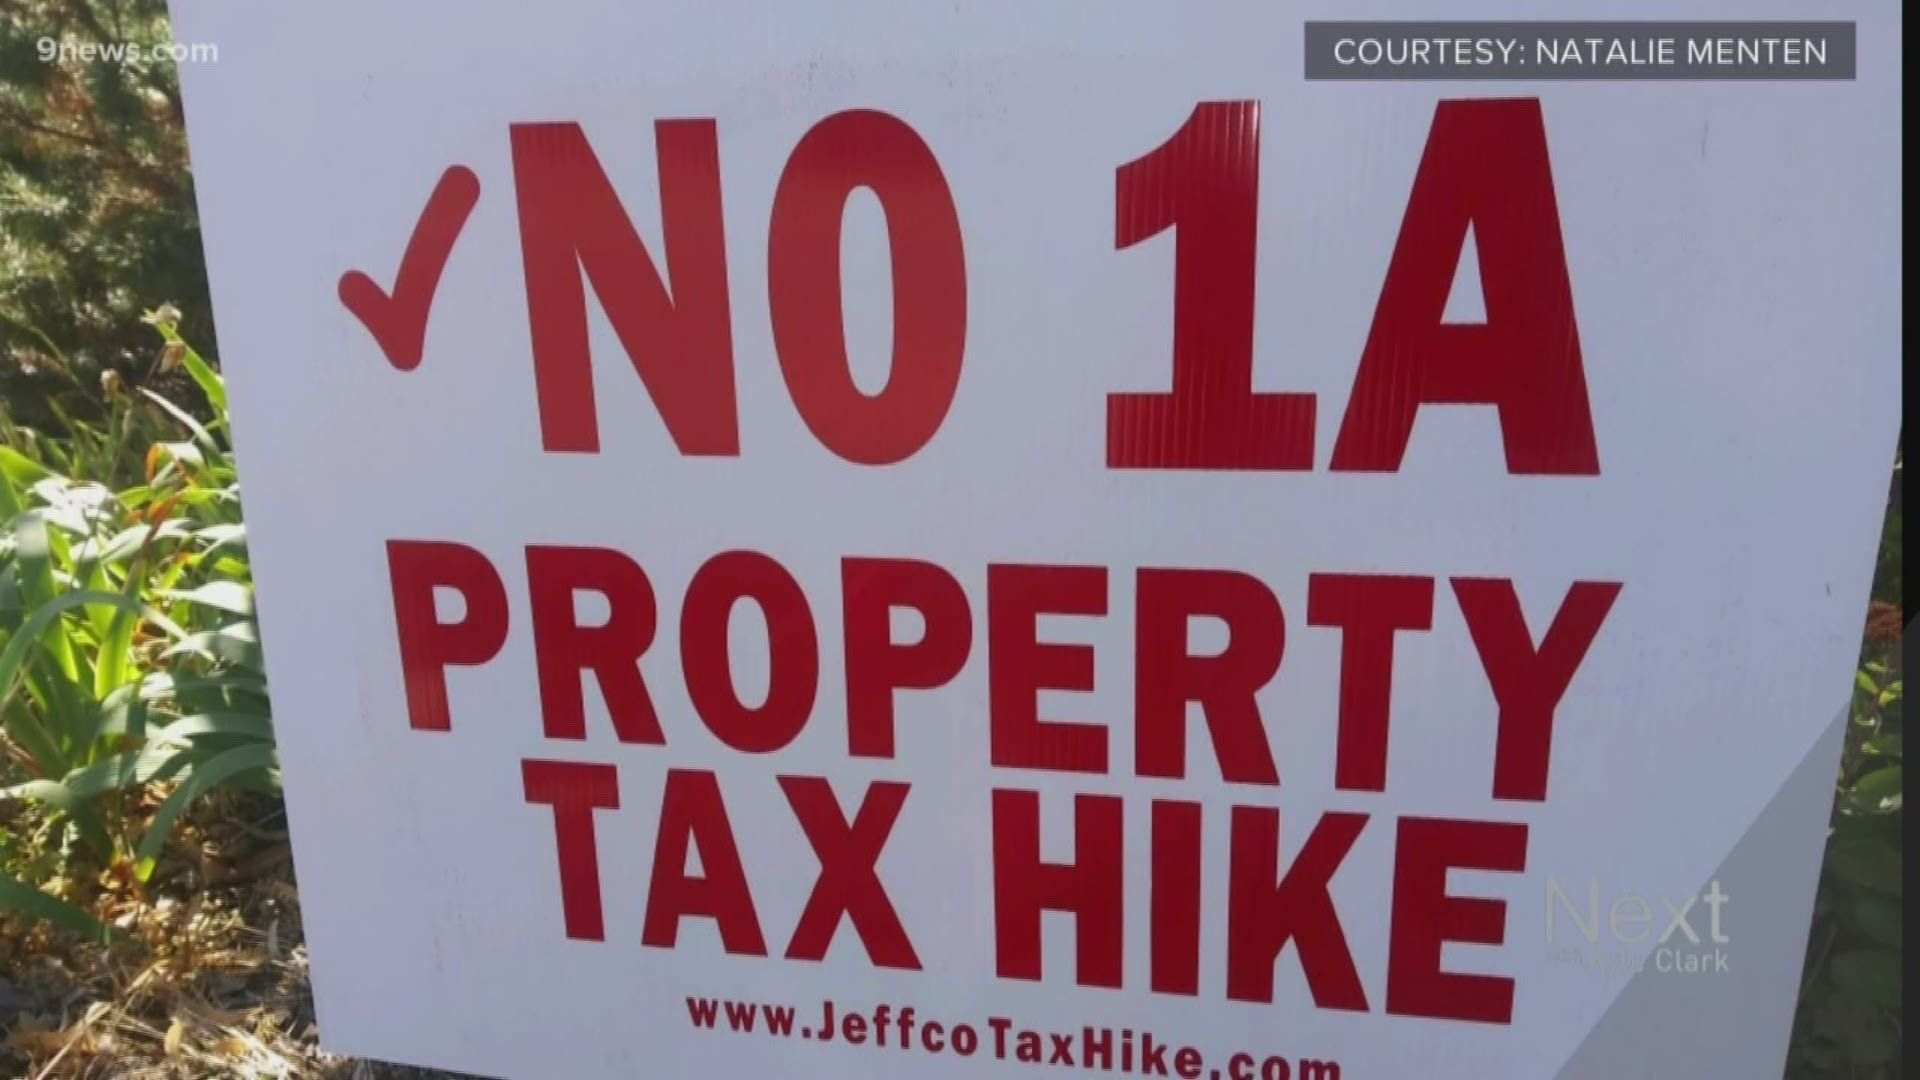 There is a strange argument against a tax increase in Jefferson County on the county’s official voter guide.